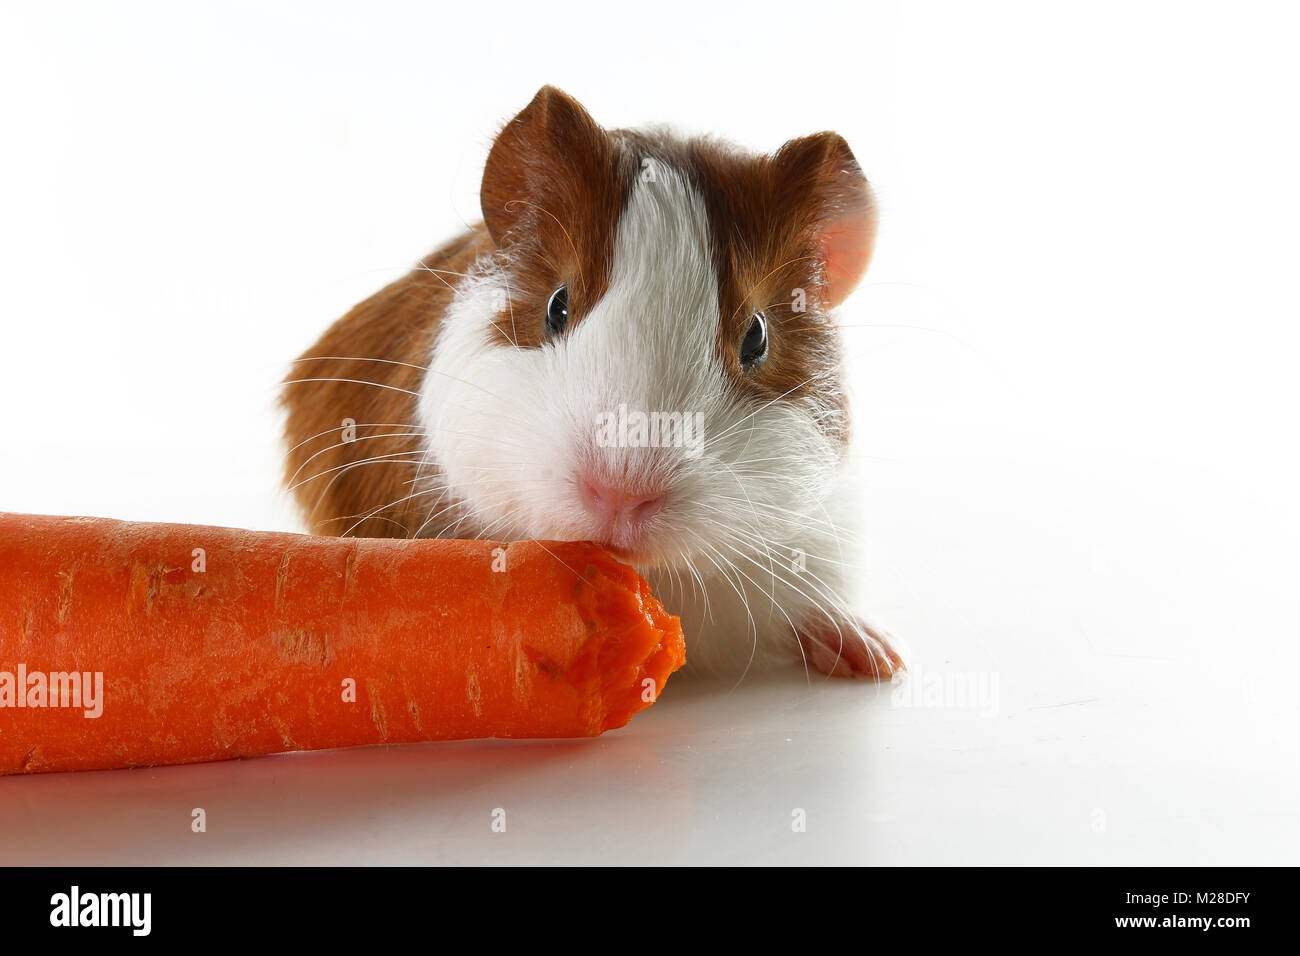 Guinea pig on studio white background. Isolated white pet photo. Sheltie peruvian pigs with symmetric pattern. Domestic guinea pig Cavia porcellus or cavy Stock Photo